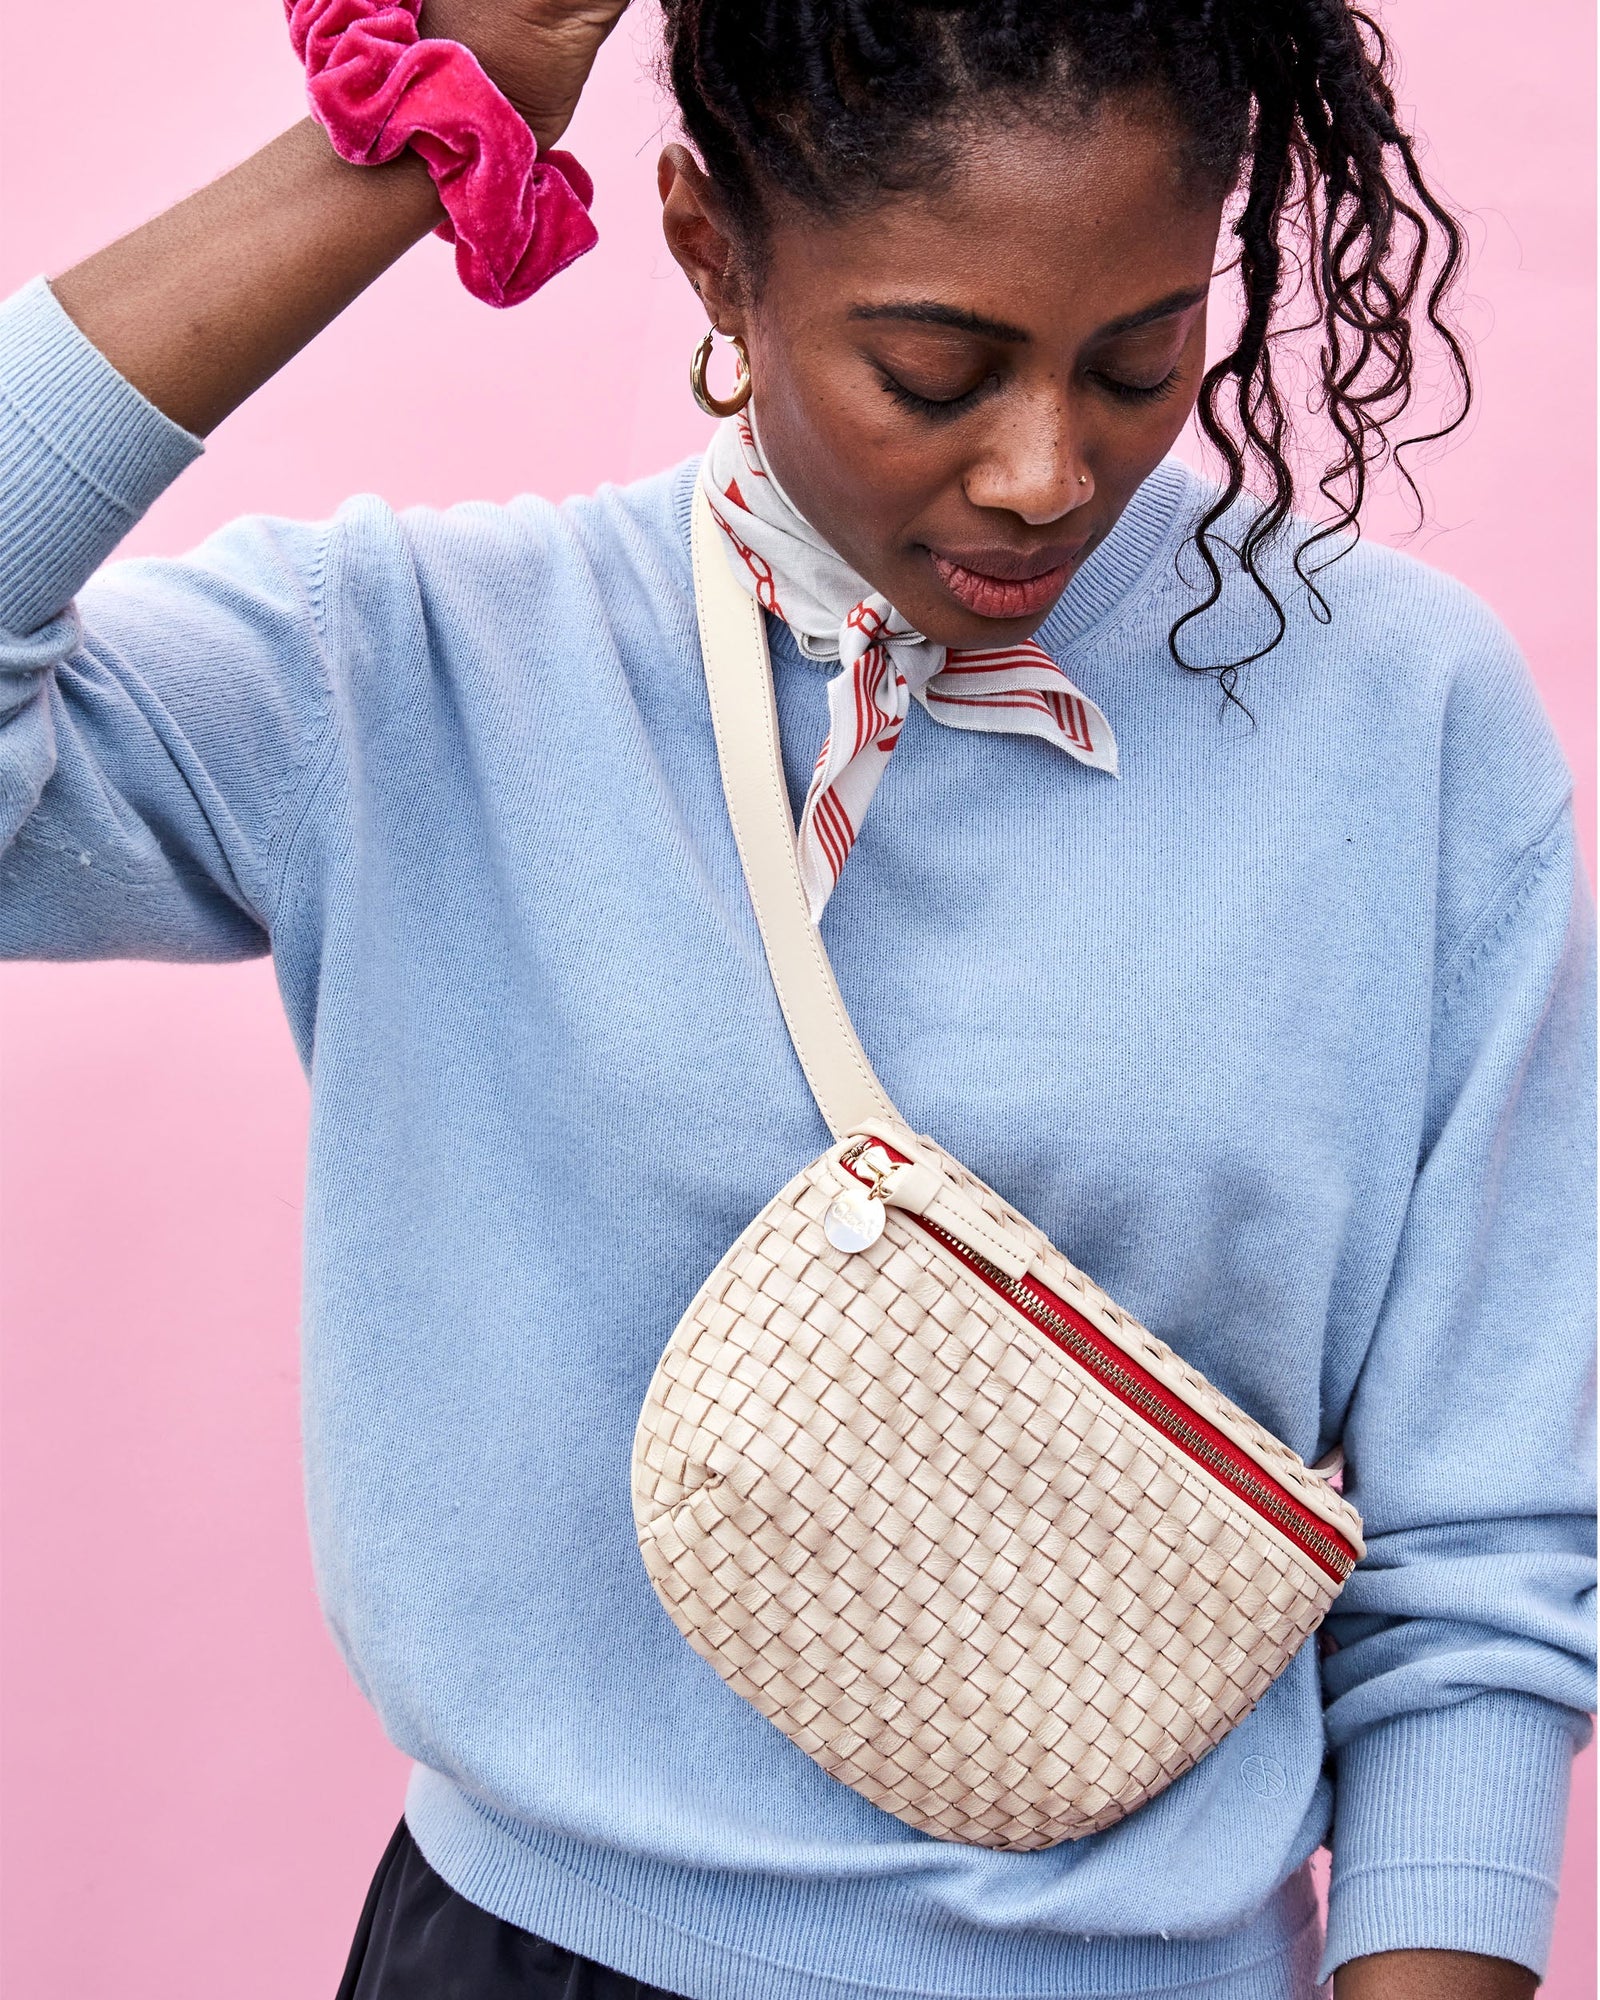 Mecca Wearing the Cream Woven Checker Fanny Pack and Touching her Hair